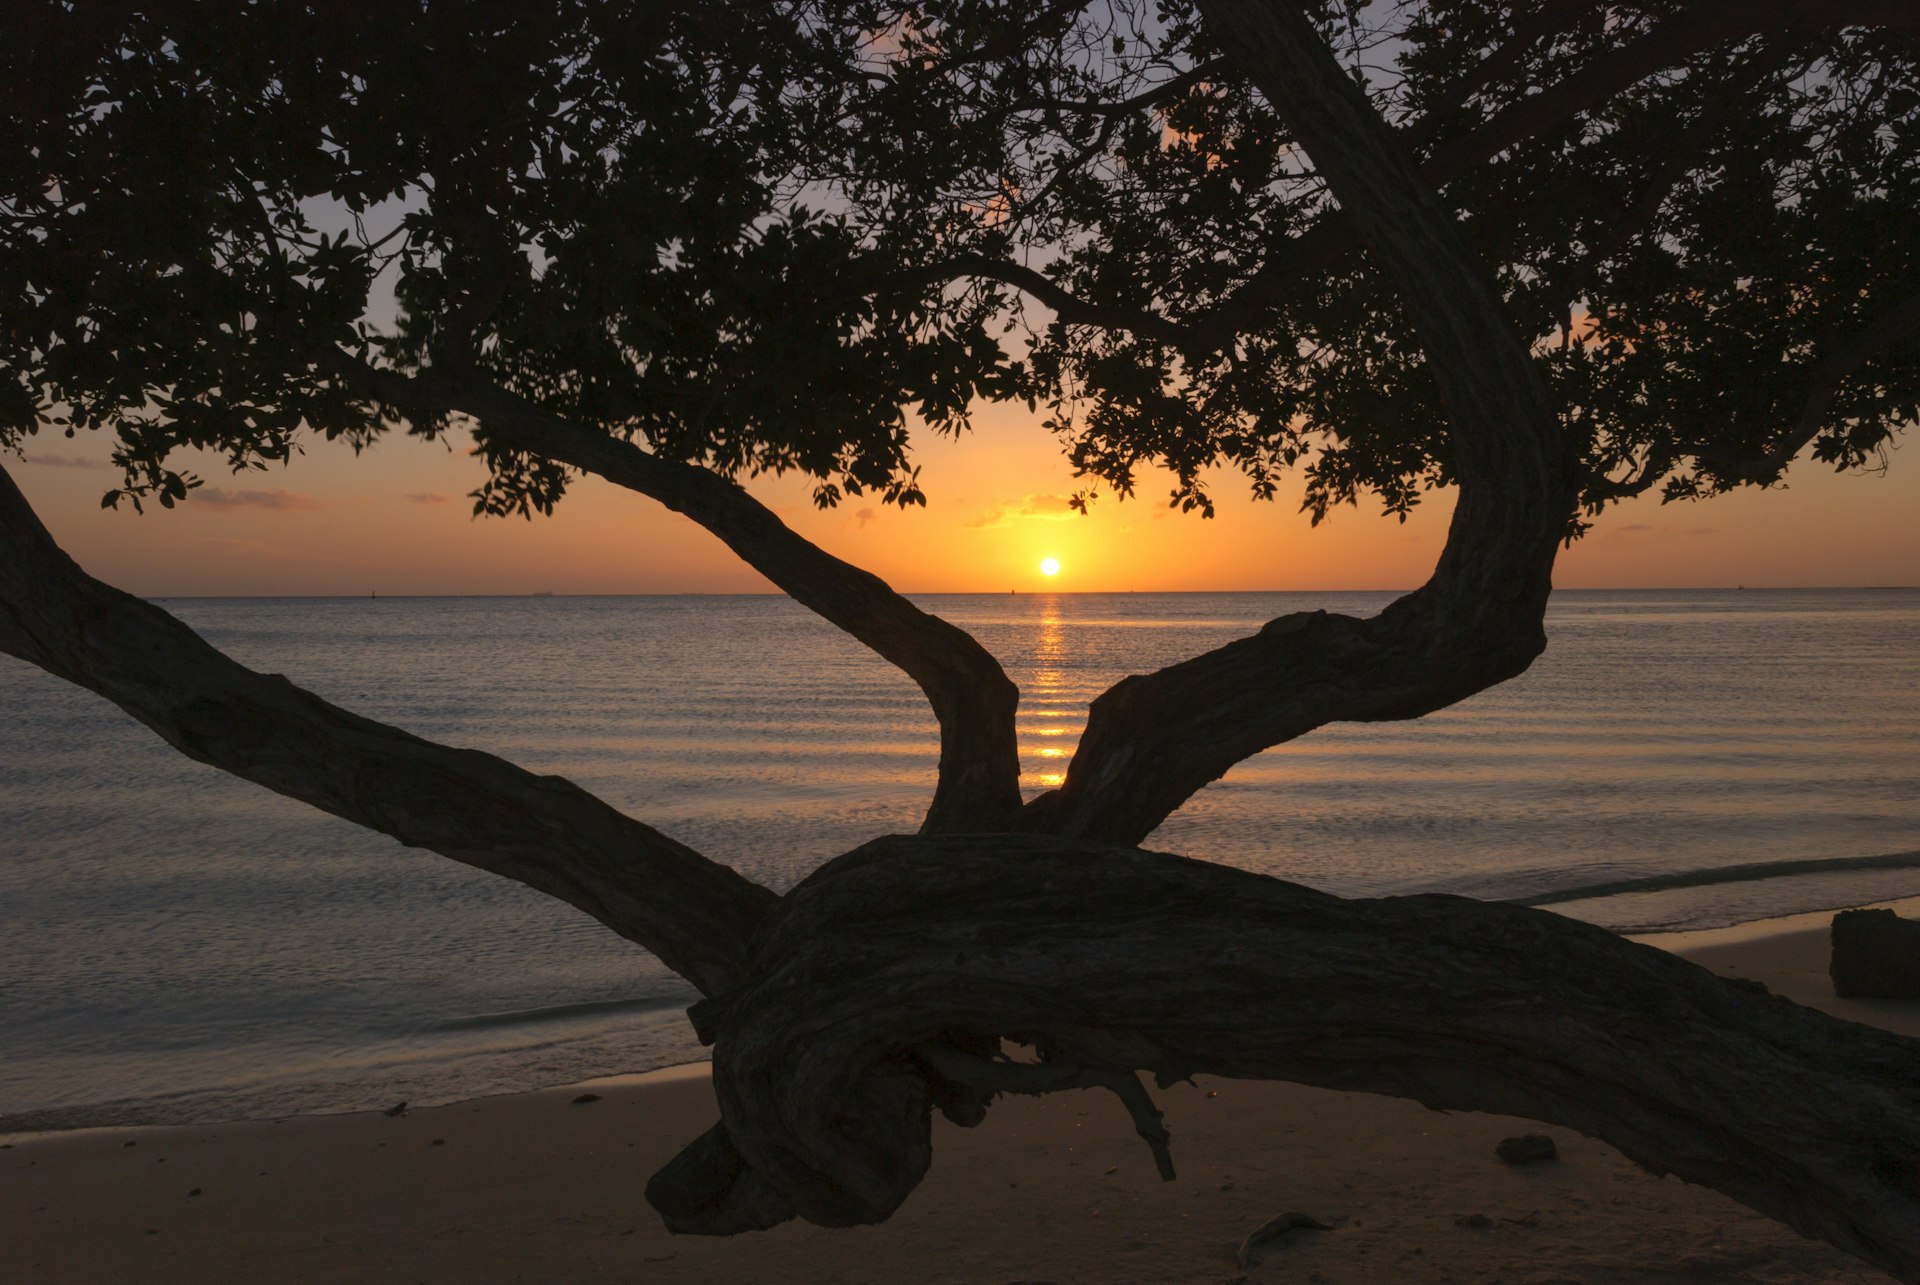 A photo captures the sun setting in between branches of a tree on a beach in Aruba